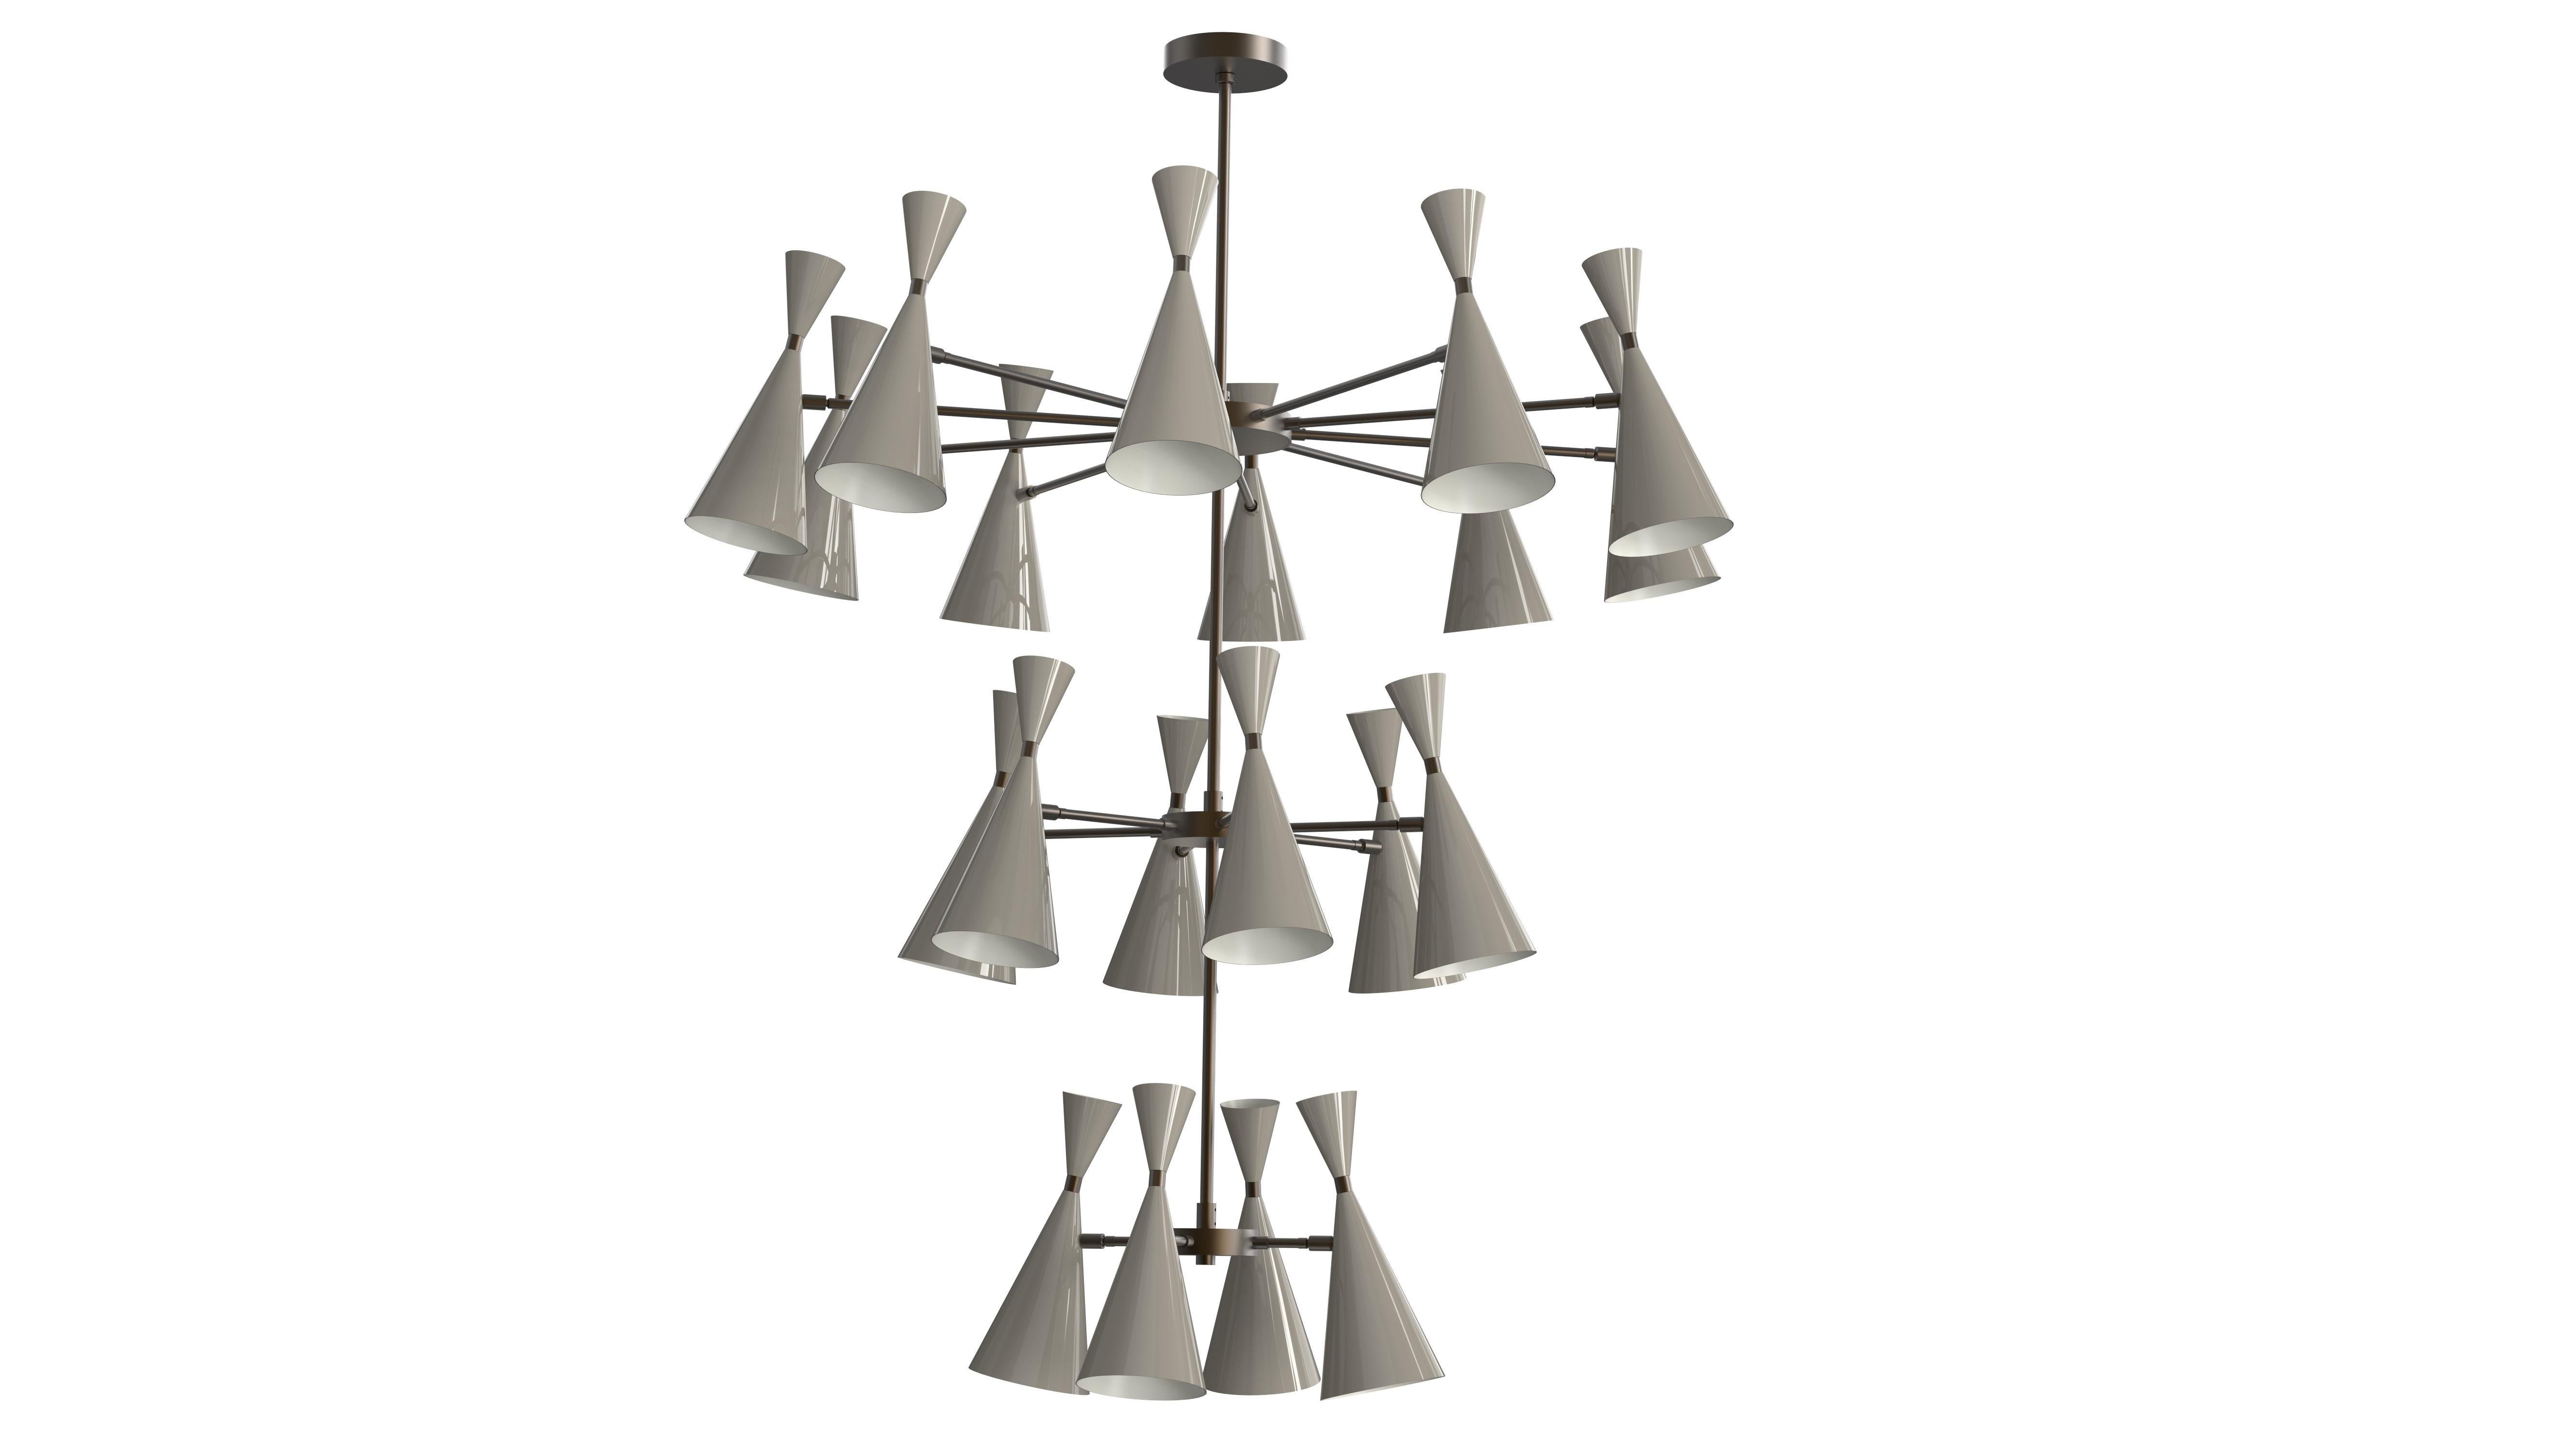 Massive 3-Tier MONOLITH Enamel and Brass Chandelier by Blueprint Lighting, 2016 For Sale 2